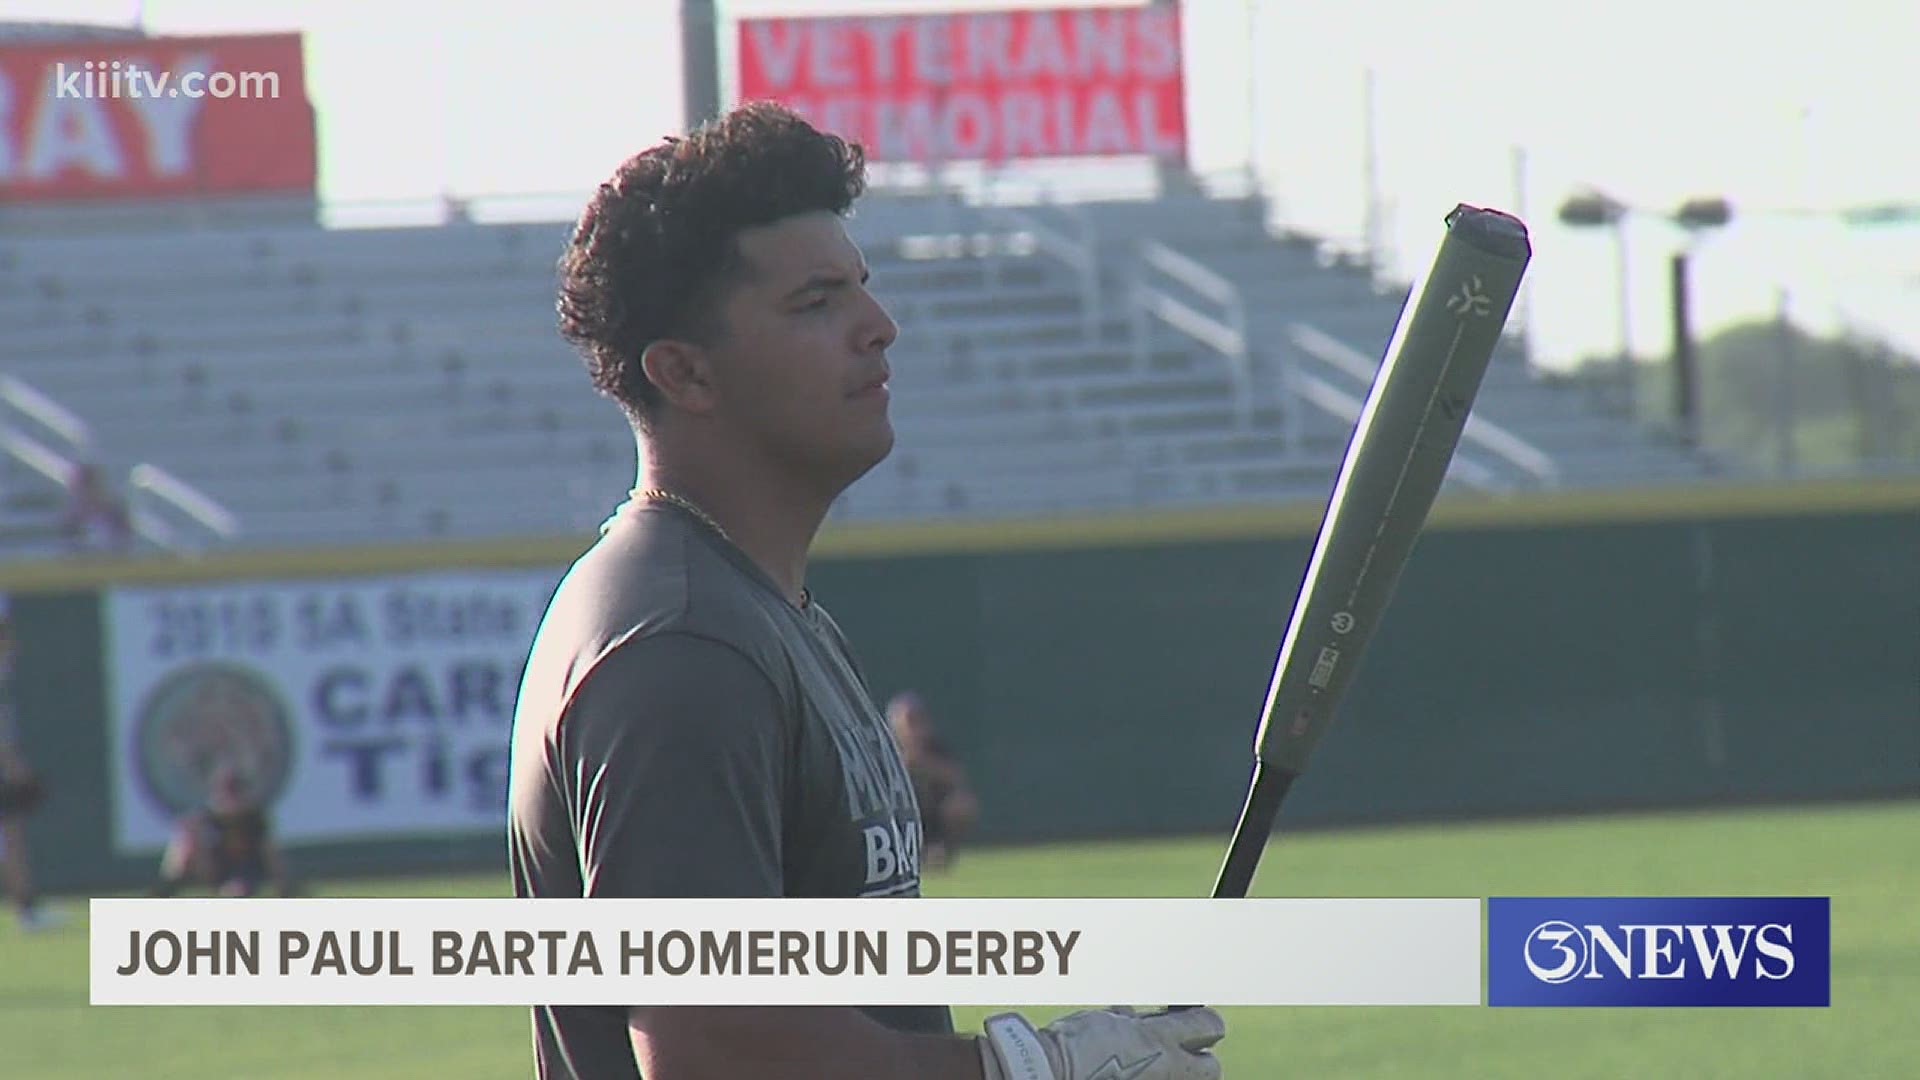 Andrew Garcia hit 12 homeruns in the first round and would go on to win the $1,5000 scholarship honoring the former Army corporal killed in Iraq in 2006.